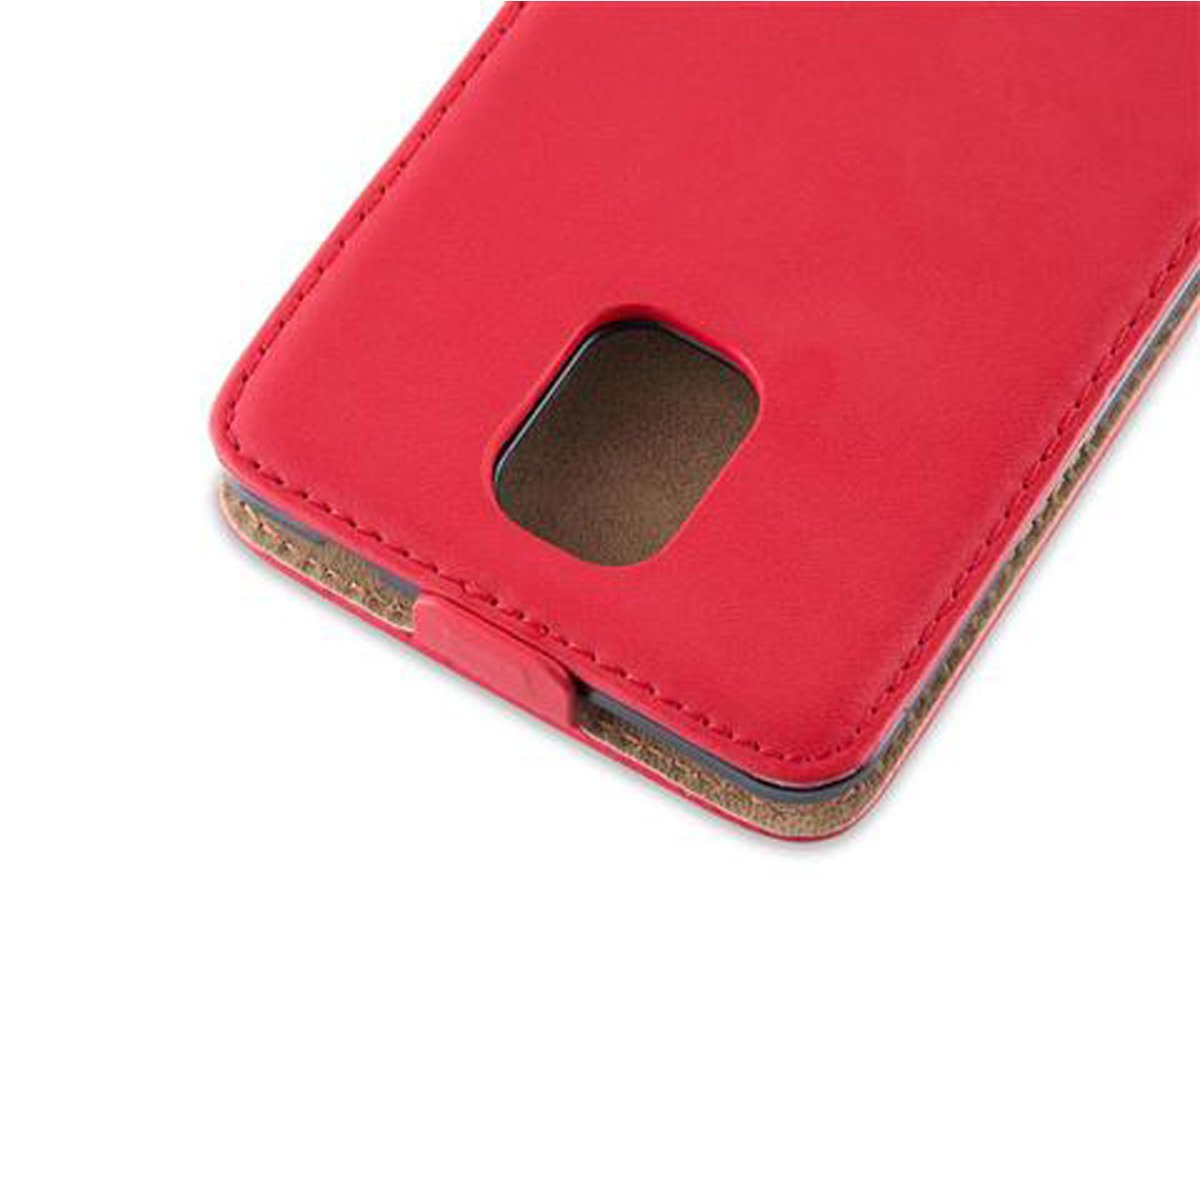 CHILI Galaxy Flip 4, ROT im Flip Samsung, Cover, NOTE Style, CADORABO Handyhülle